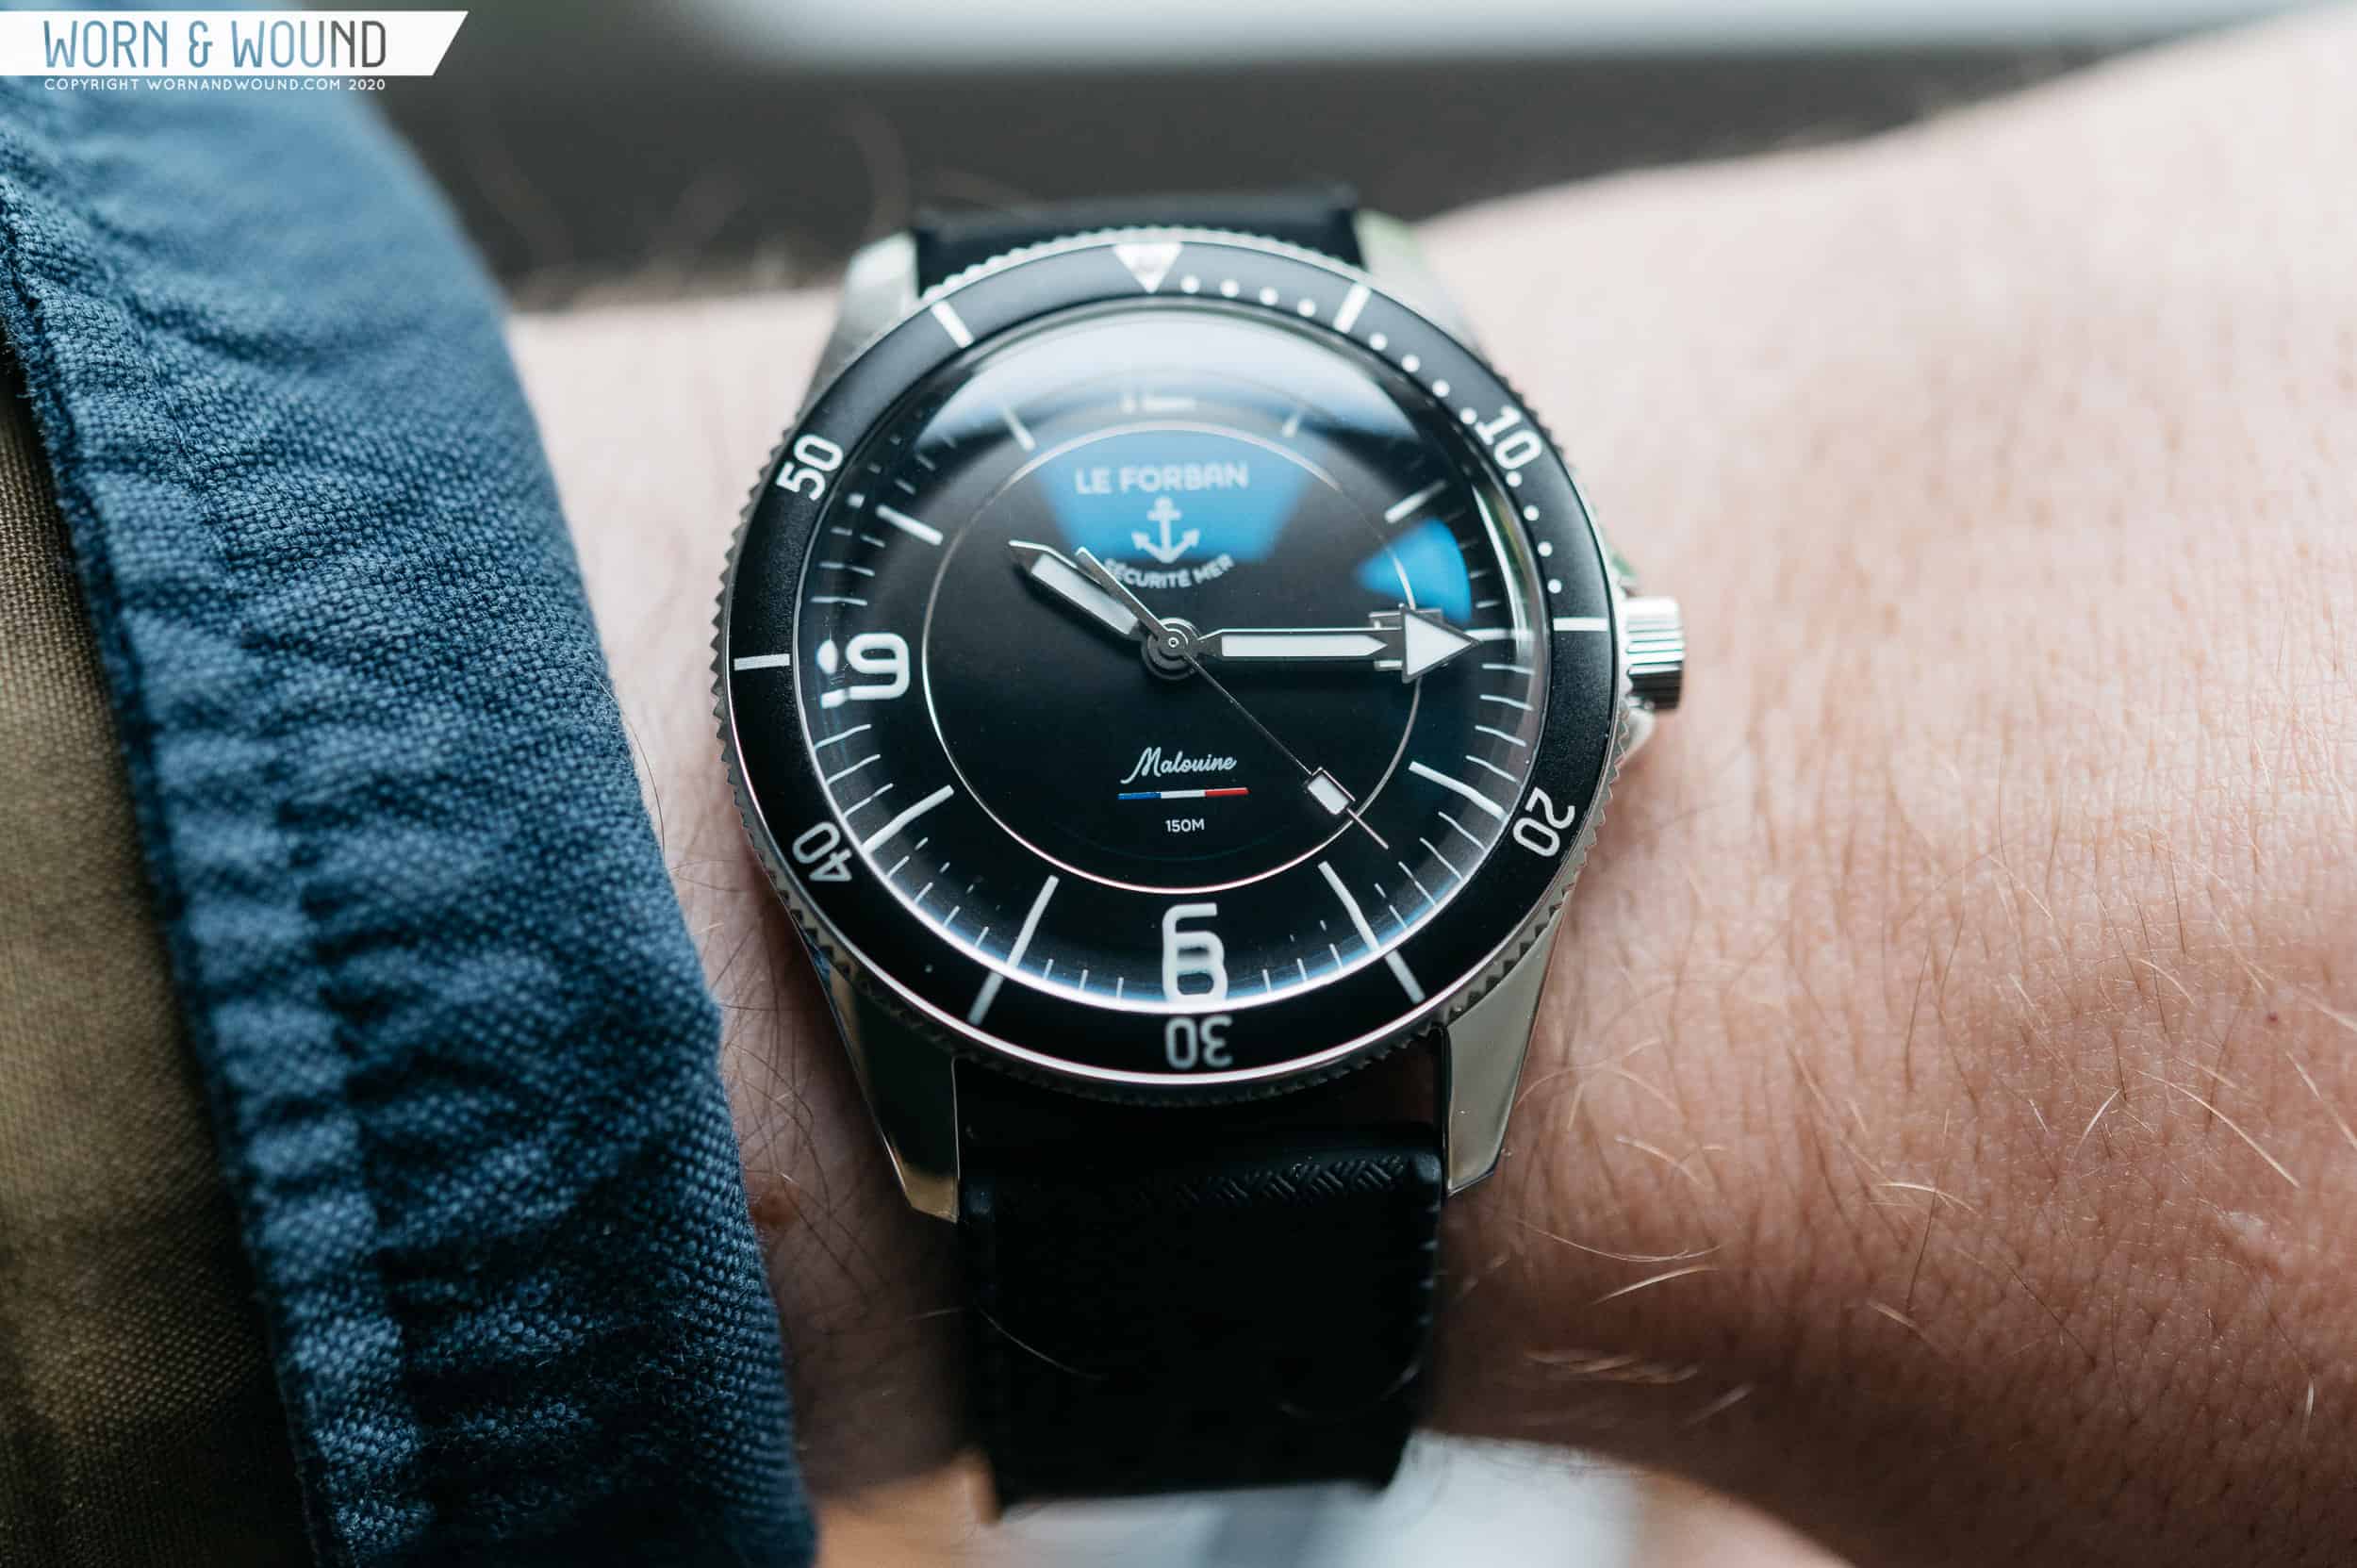 Hands-On: The Le Forban Malouine Dive Watch